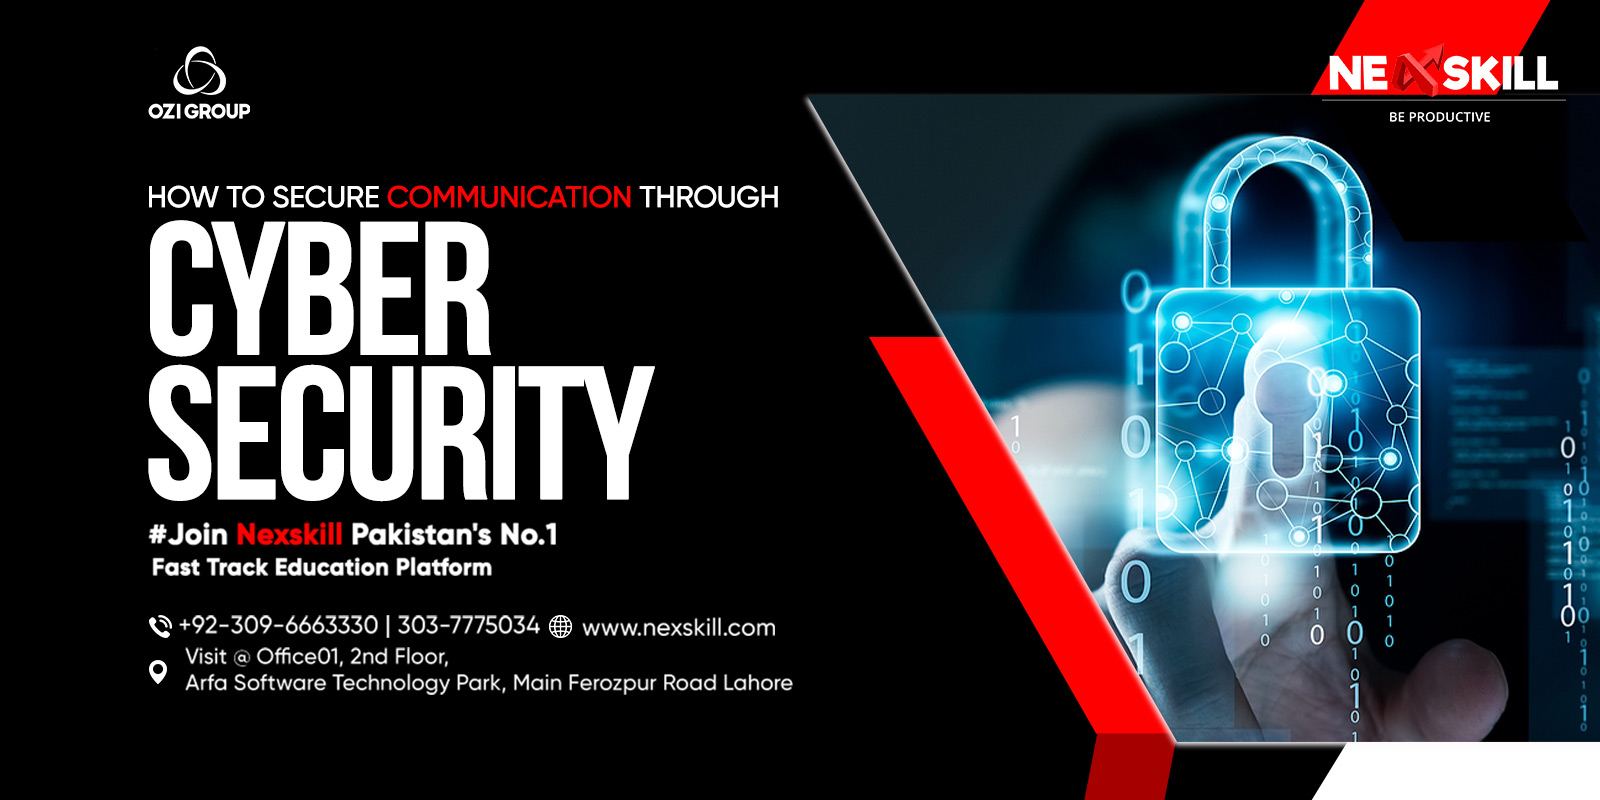 How to Secure Communication Through Cyber Security￼